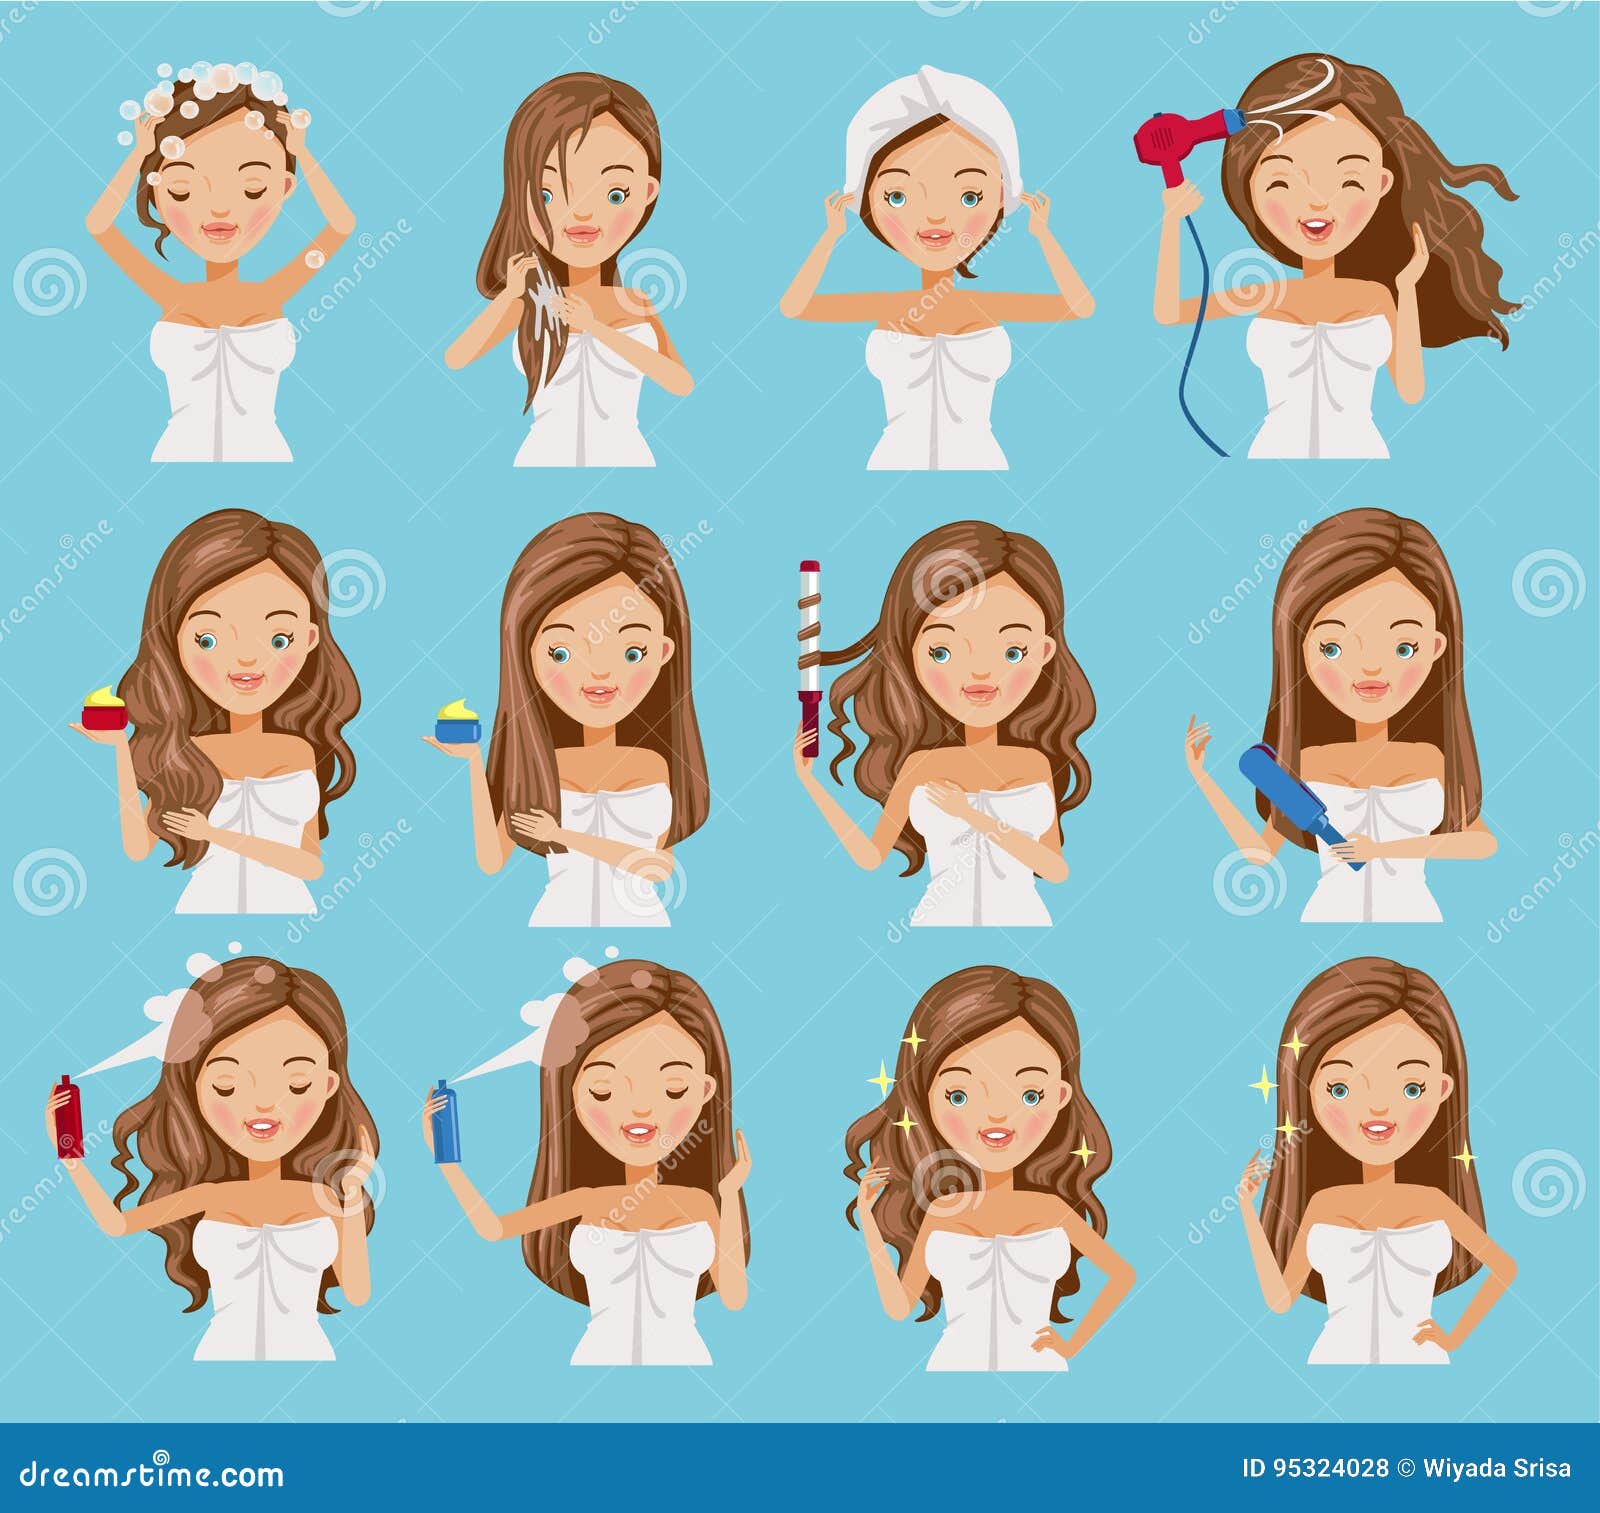 Haircare stock vector. Illustration of healthy, attractive - 95324028